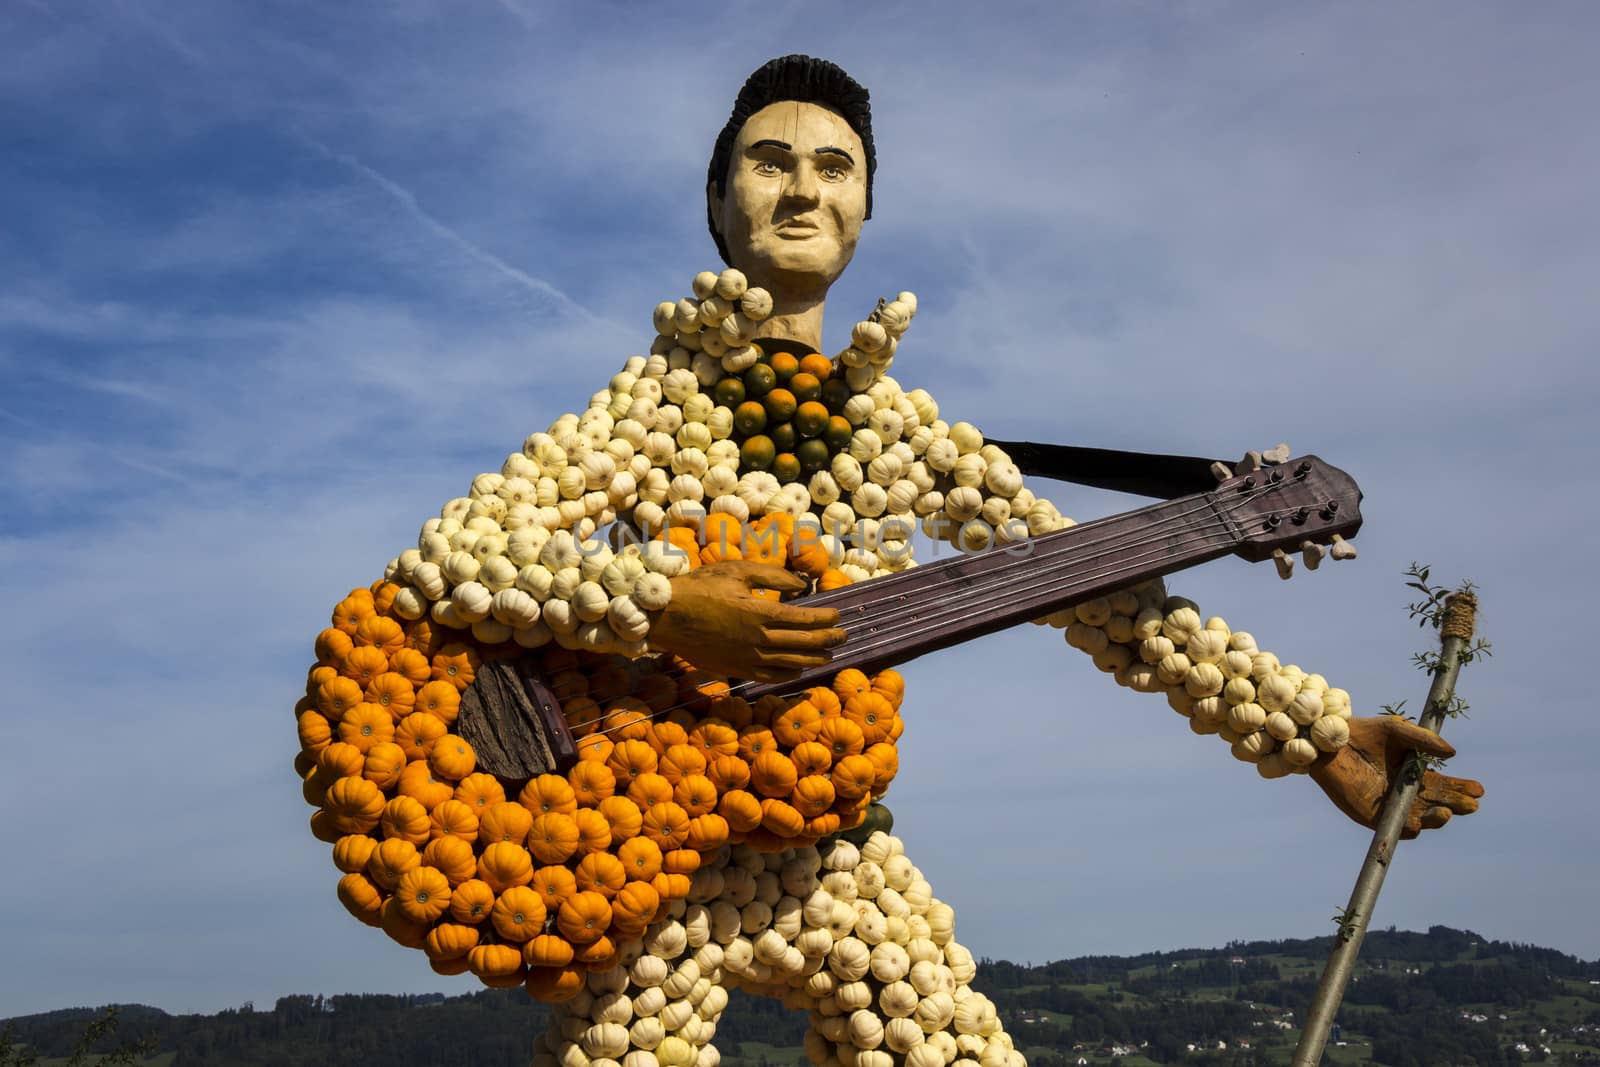 Guitar and guitarist made of small, colourful pumpkins